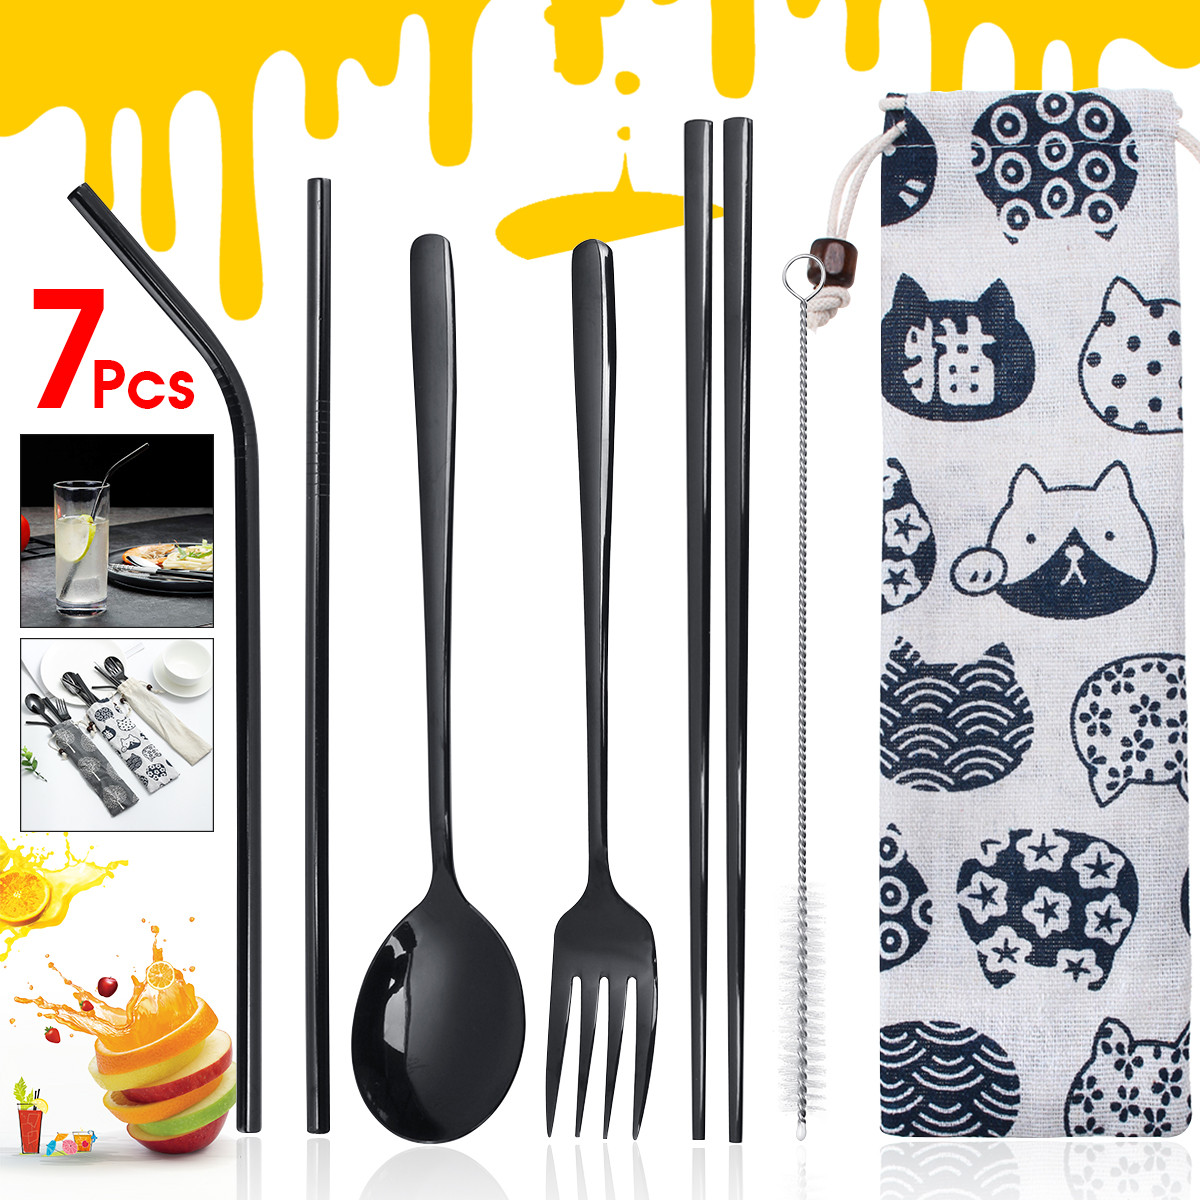 Portable-304-Stainless-Steel-Drinking-Straw-Spoon-Reusable-Straws-Fork-Chopsticks-Brush-Combination--1529584-2